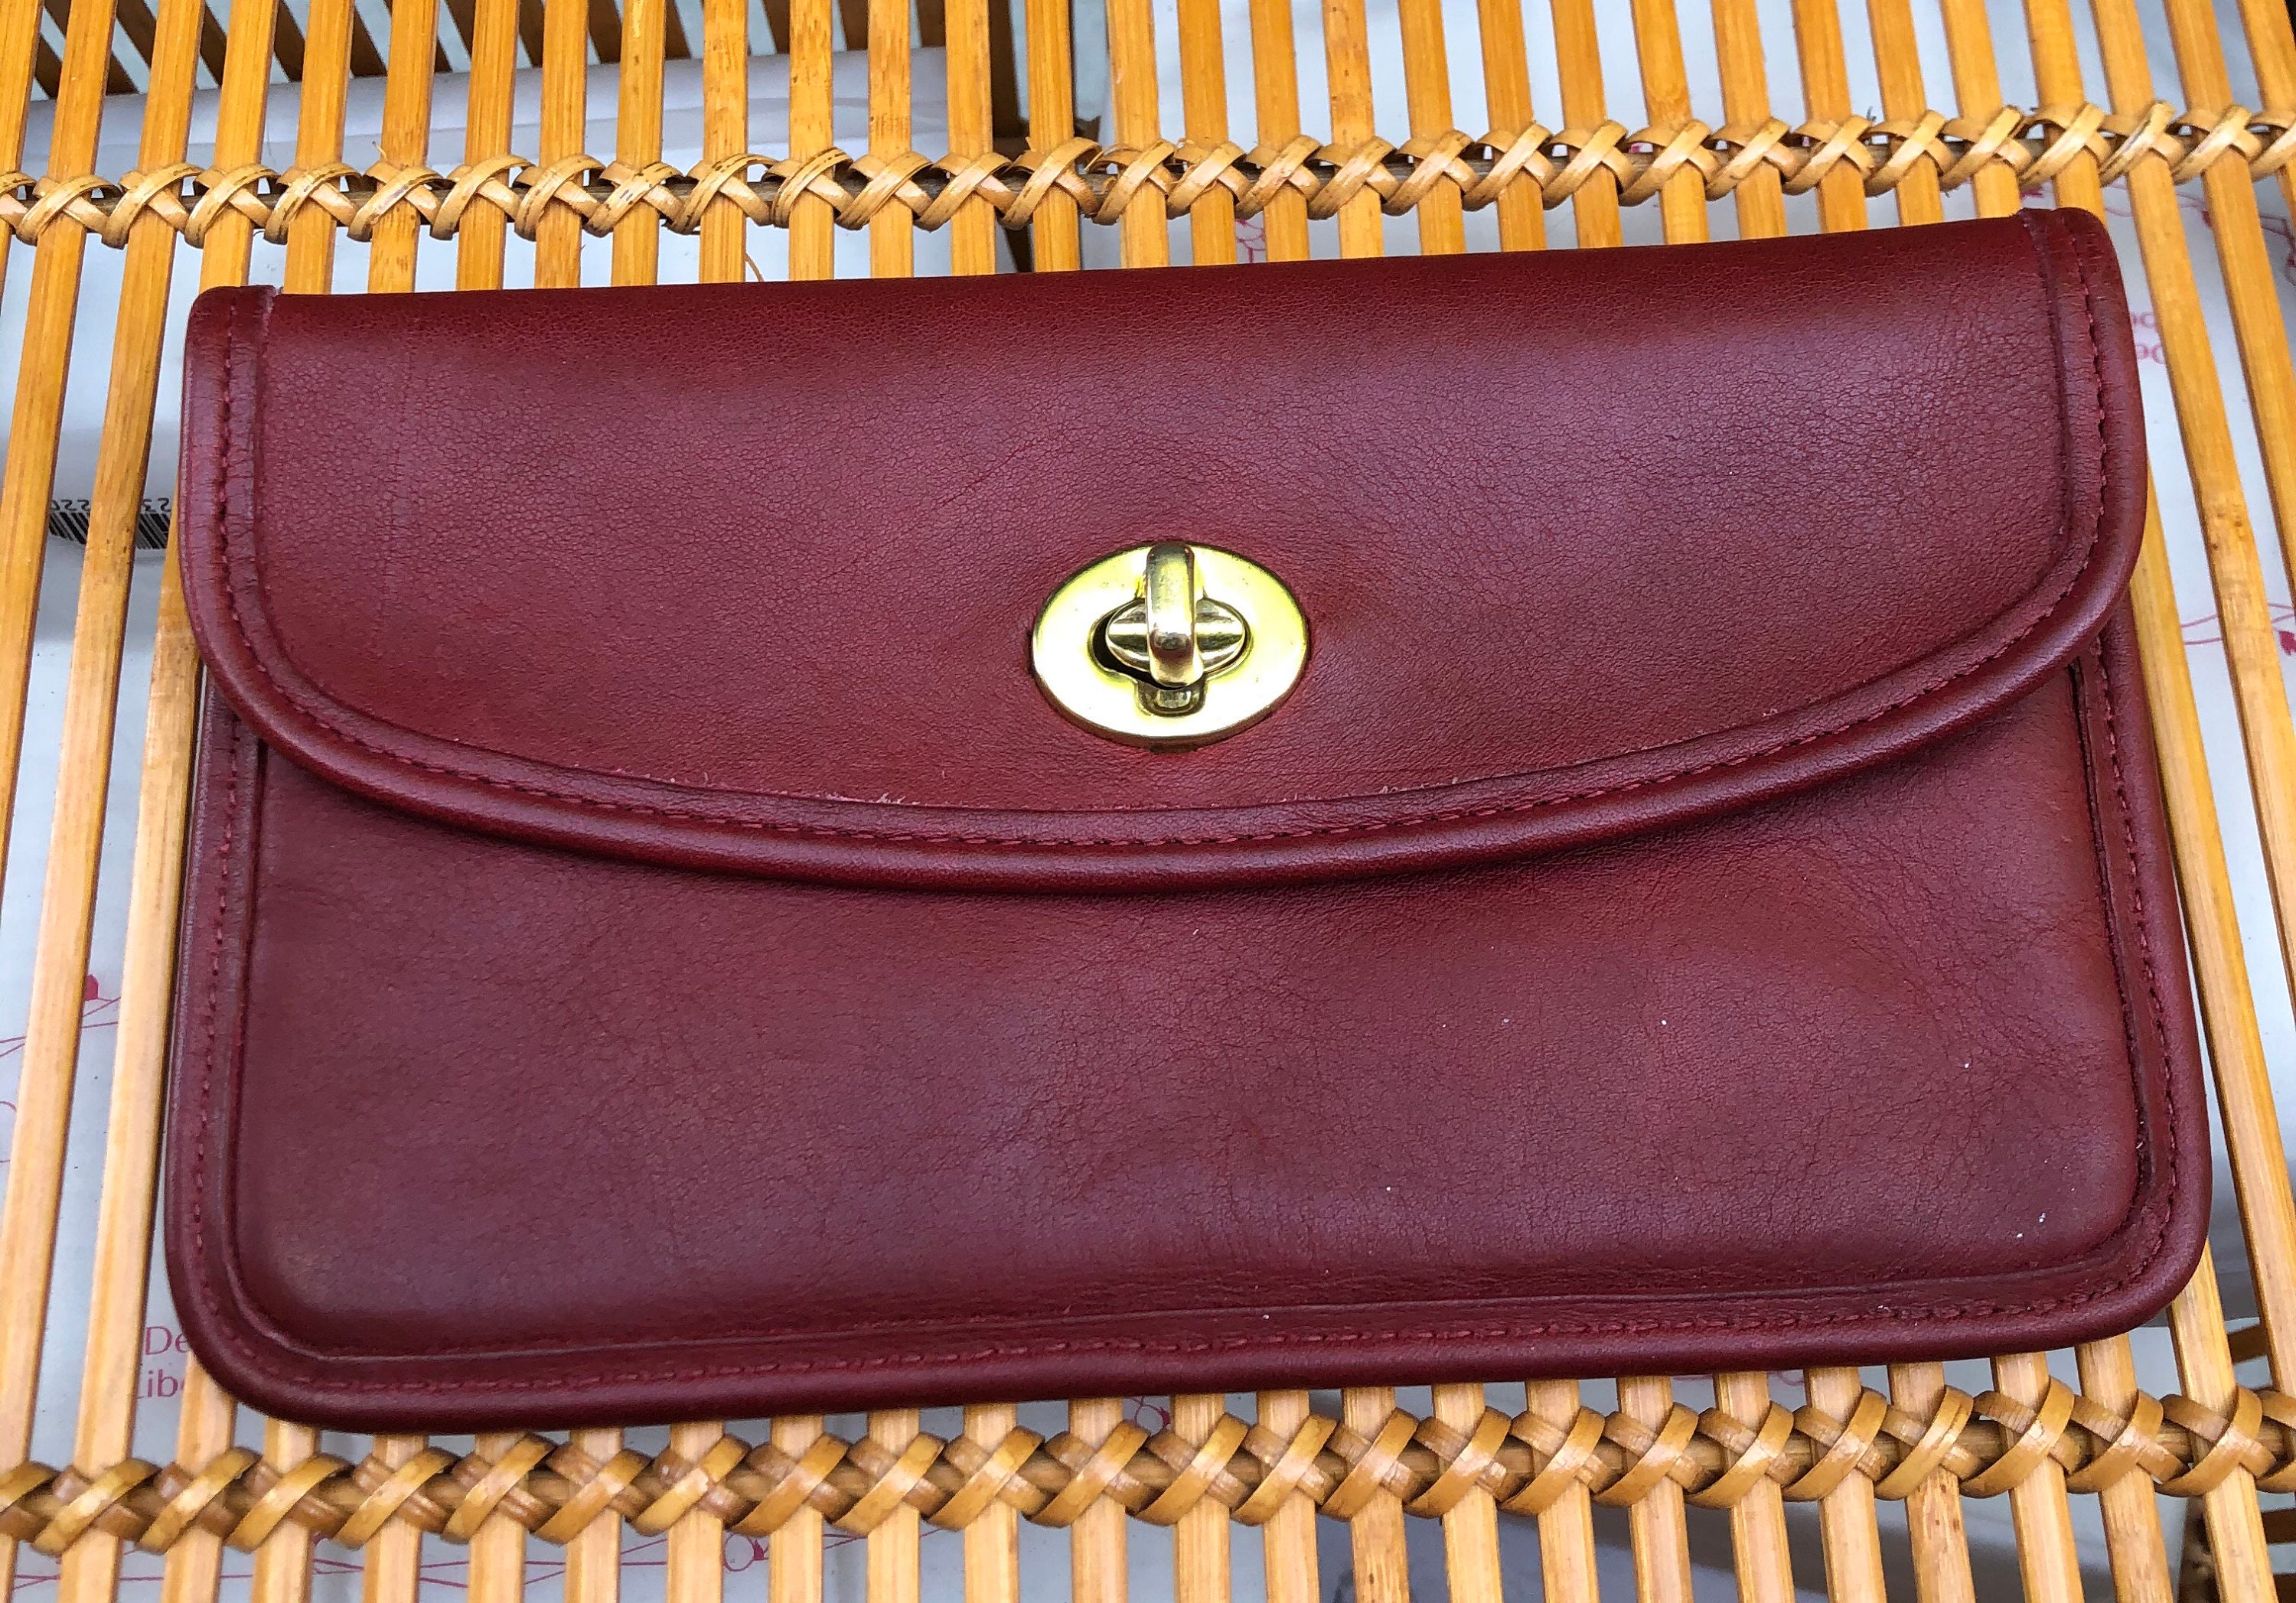 Coach Ashley Wallet for sale | Only 2 left at -60%